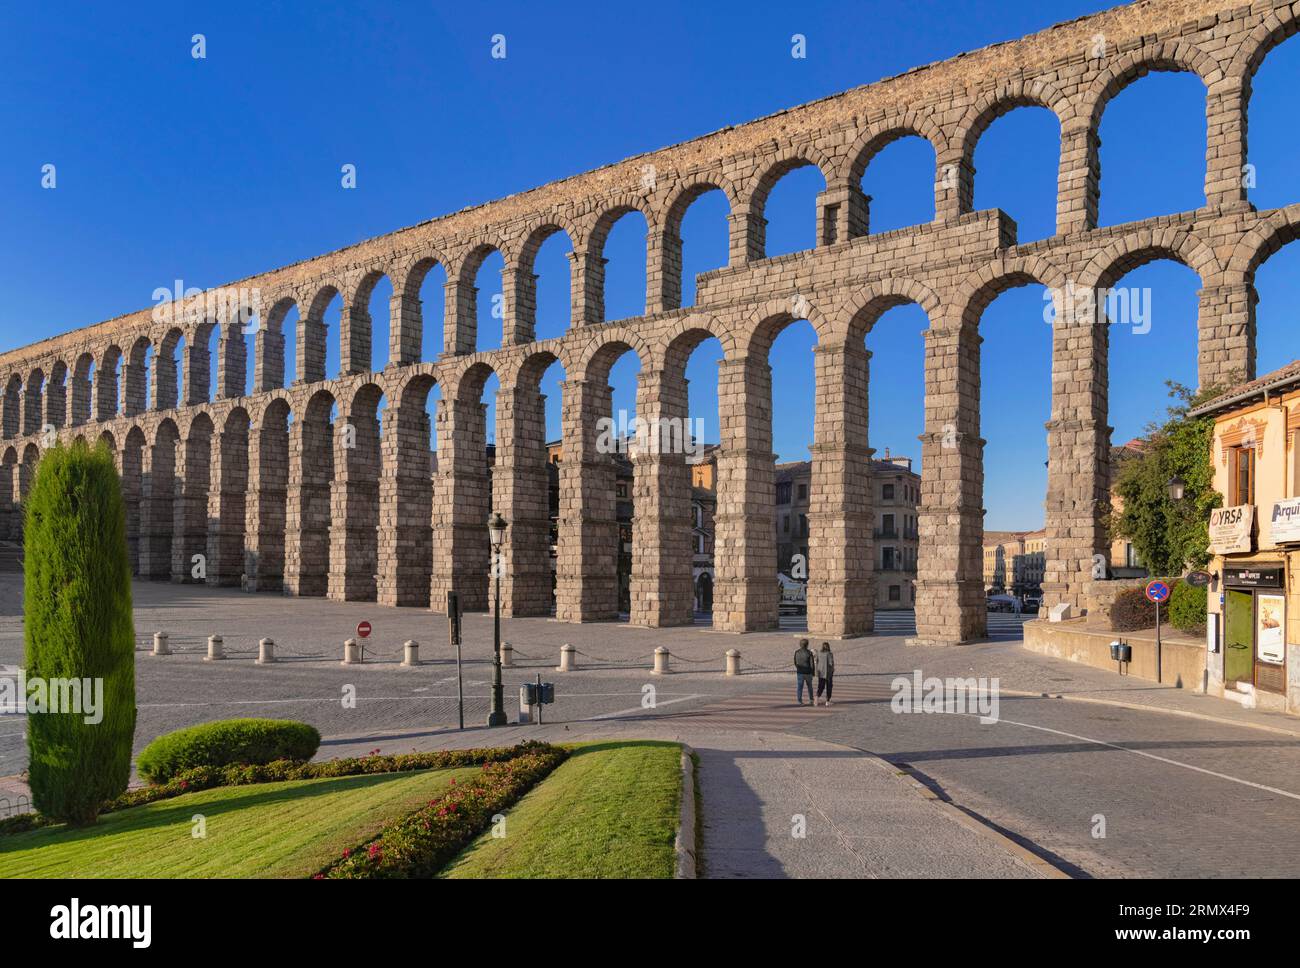 Spain, Castile and Leon, Segovia, Full panorama of the Aqueduct of Segovia, a Roman aqueduct with 167 arches built around the first century AD to chan Stock Photo